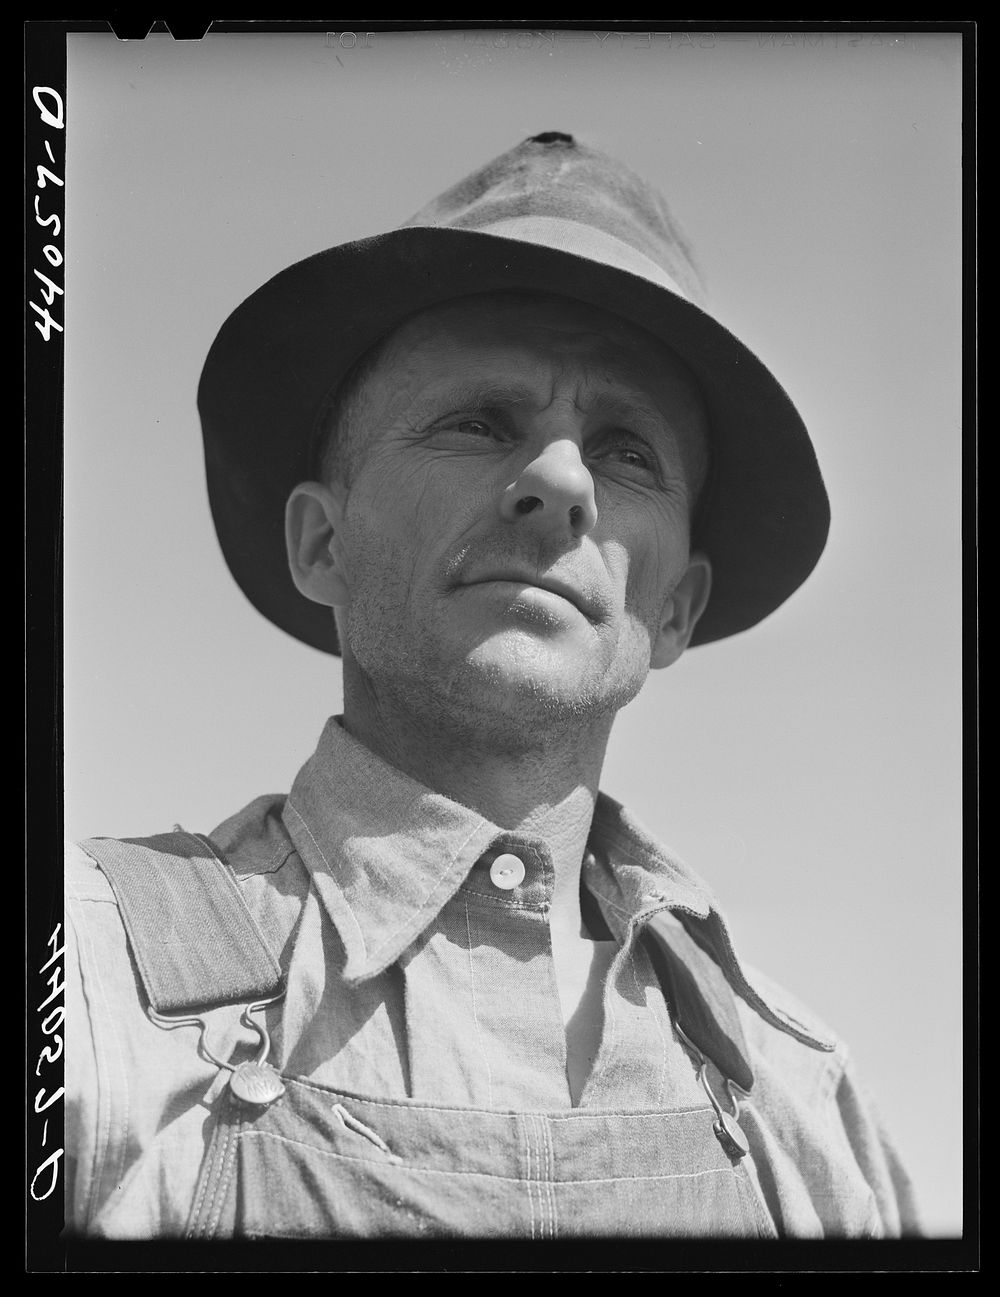 Mr. Lemuel Smith, FSA (Farm Security Administration) borrower. Carroll County, Georgia. Sourced from the Library of Congress.